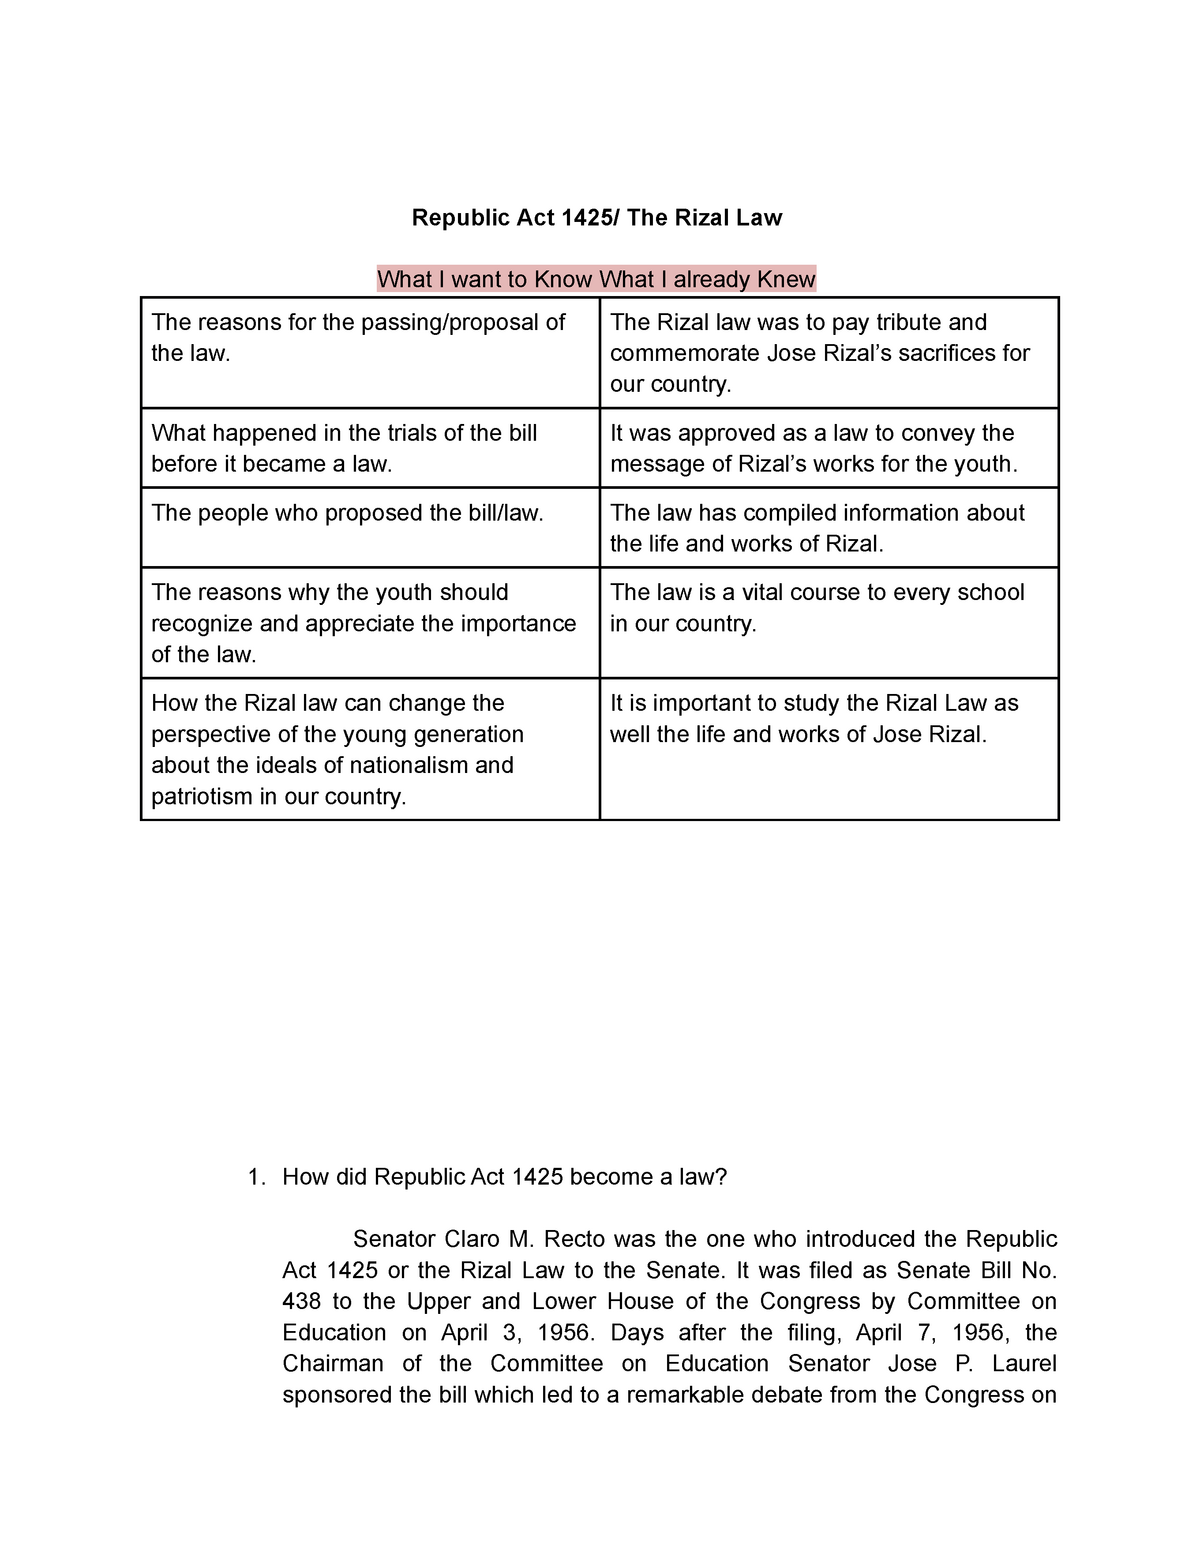 Rizal Law Homework - Republic Act 1425/ The Rizal Law What I want to